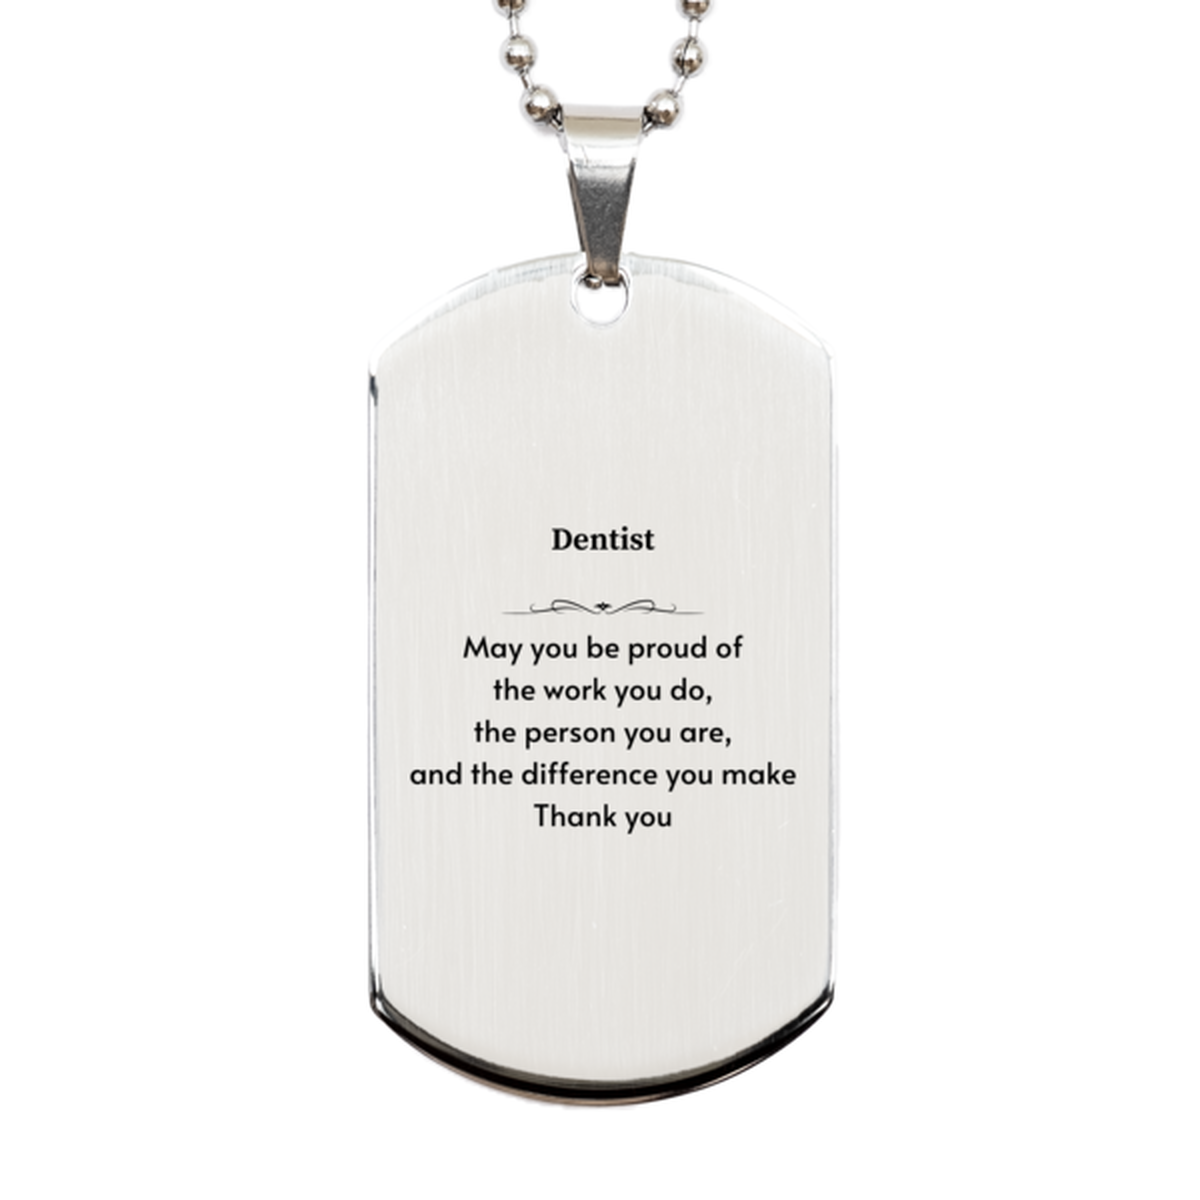 Heartwarming Silver Dog Tag Retirement Coworkers Gifts for Dentist, Dentist May You be proud of the work you do, the person you are Gifts for Boss Men Women Friends